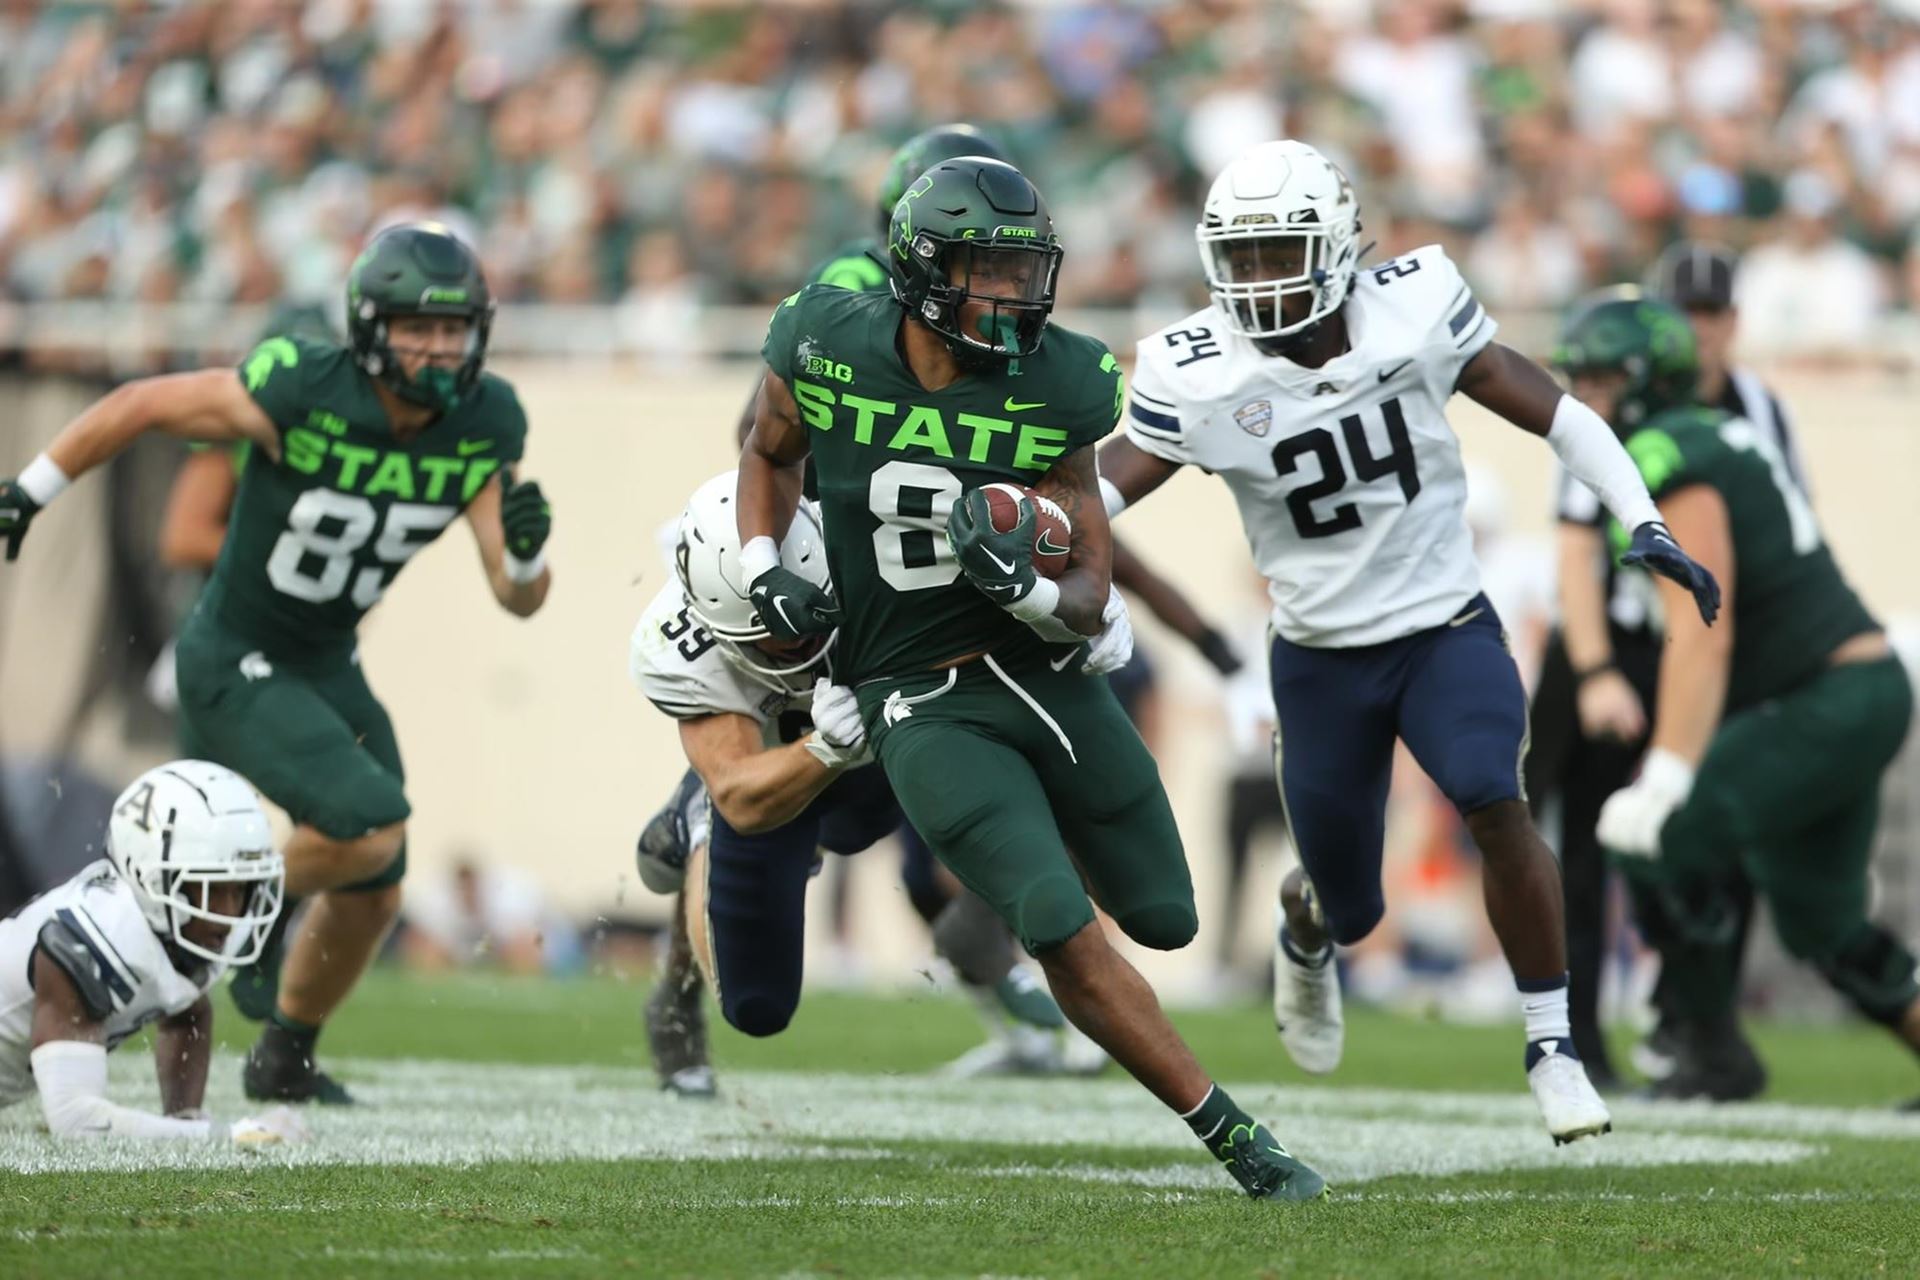 #14 Michigan State Easily Zips Up Akron, 52-0